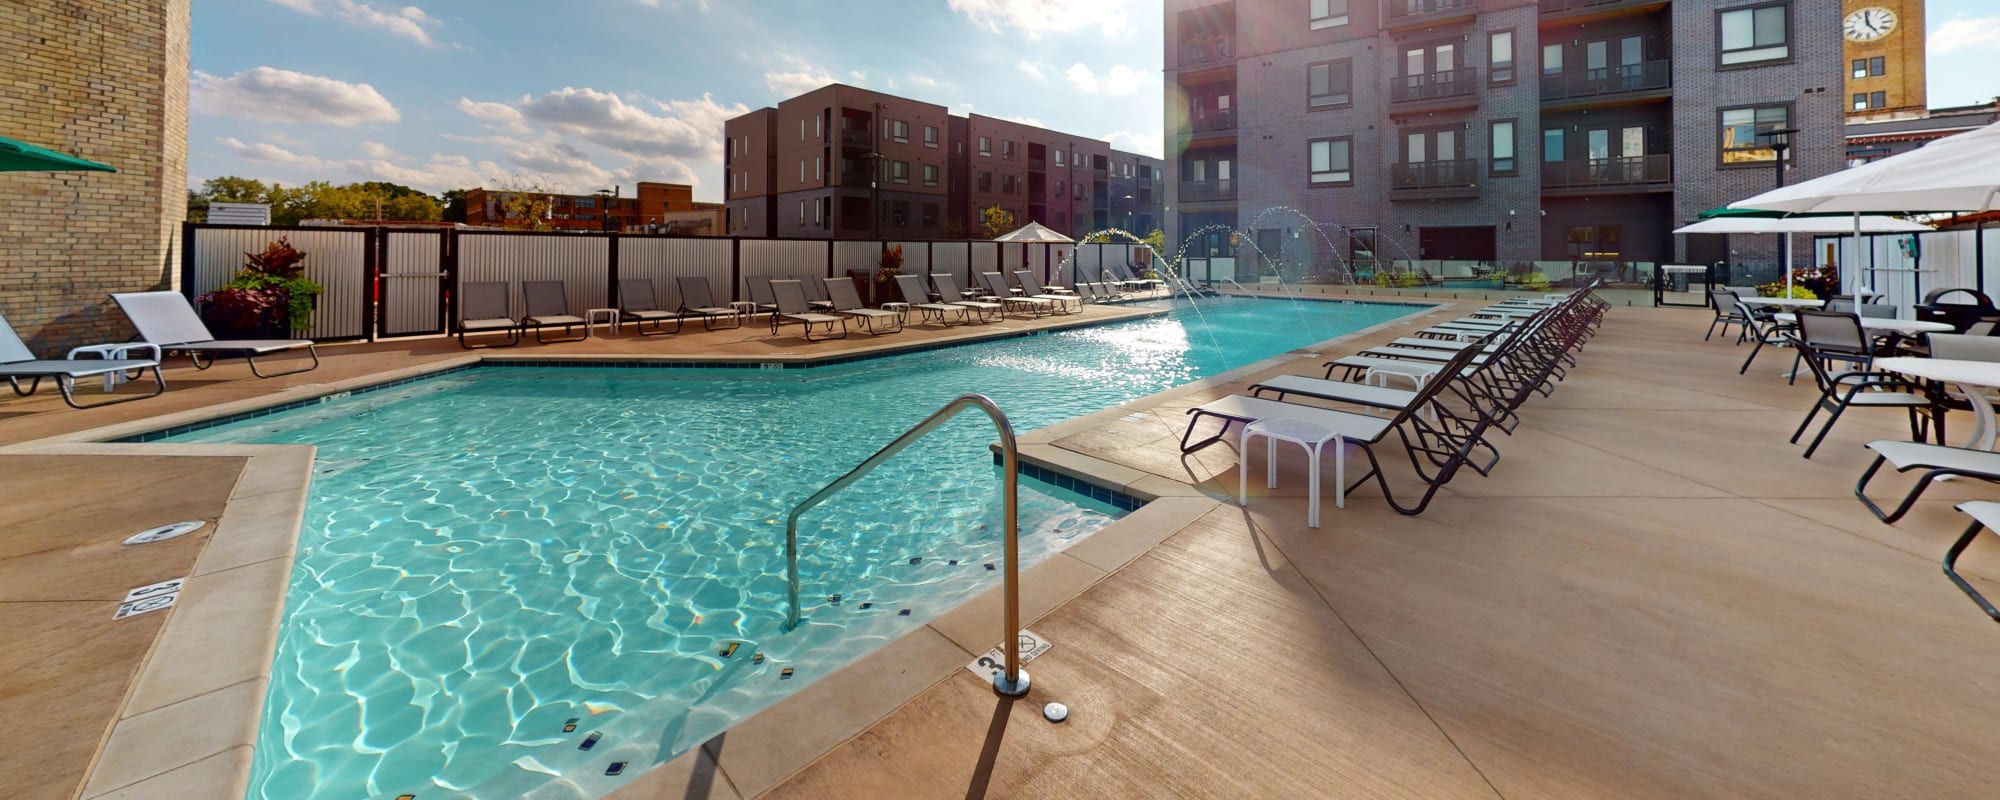 Residential Pool at Factory 52 Apartments in Norwood, OH